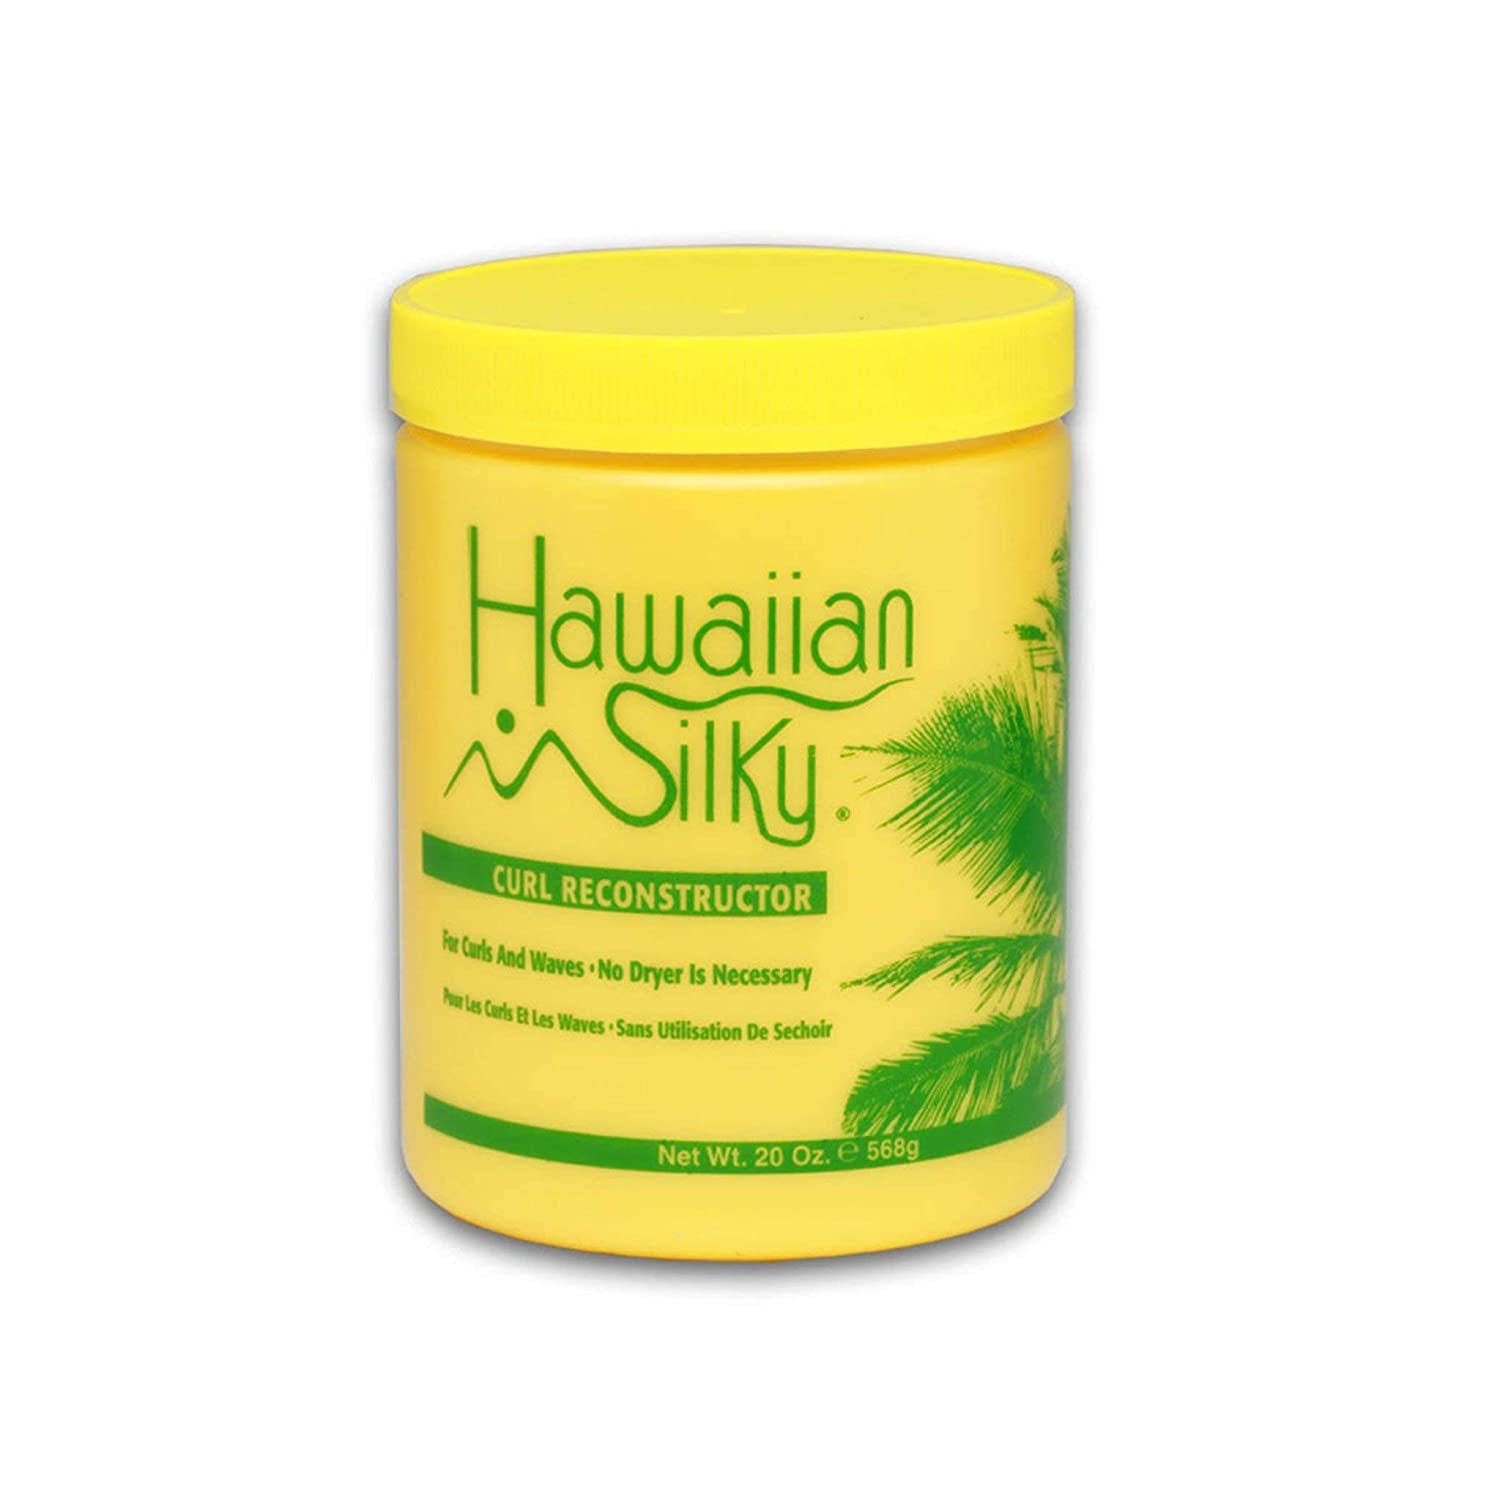 Hawaiian Silky Curl Reconstructor for all Curls and Waves 20 oz